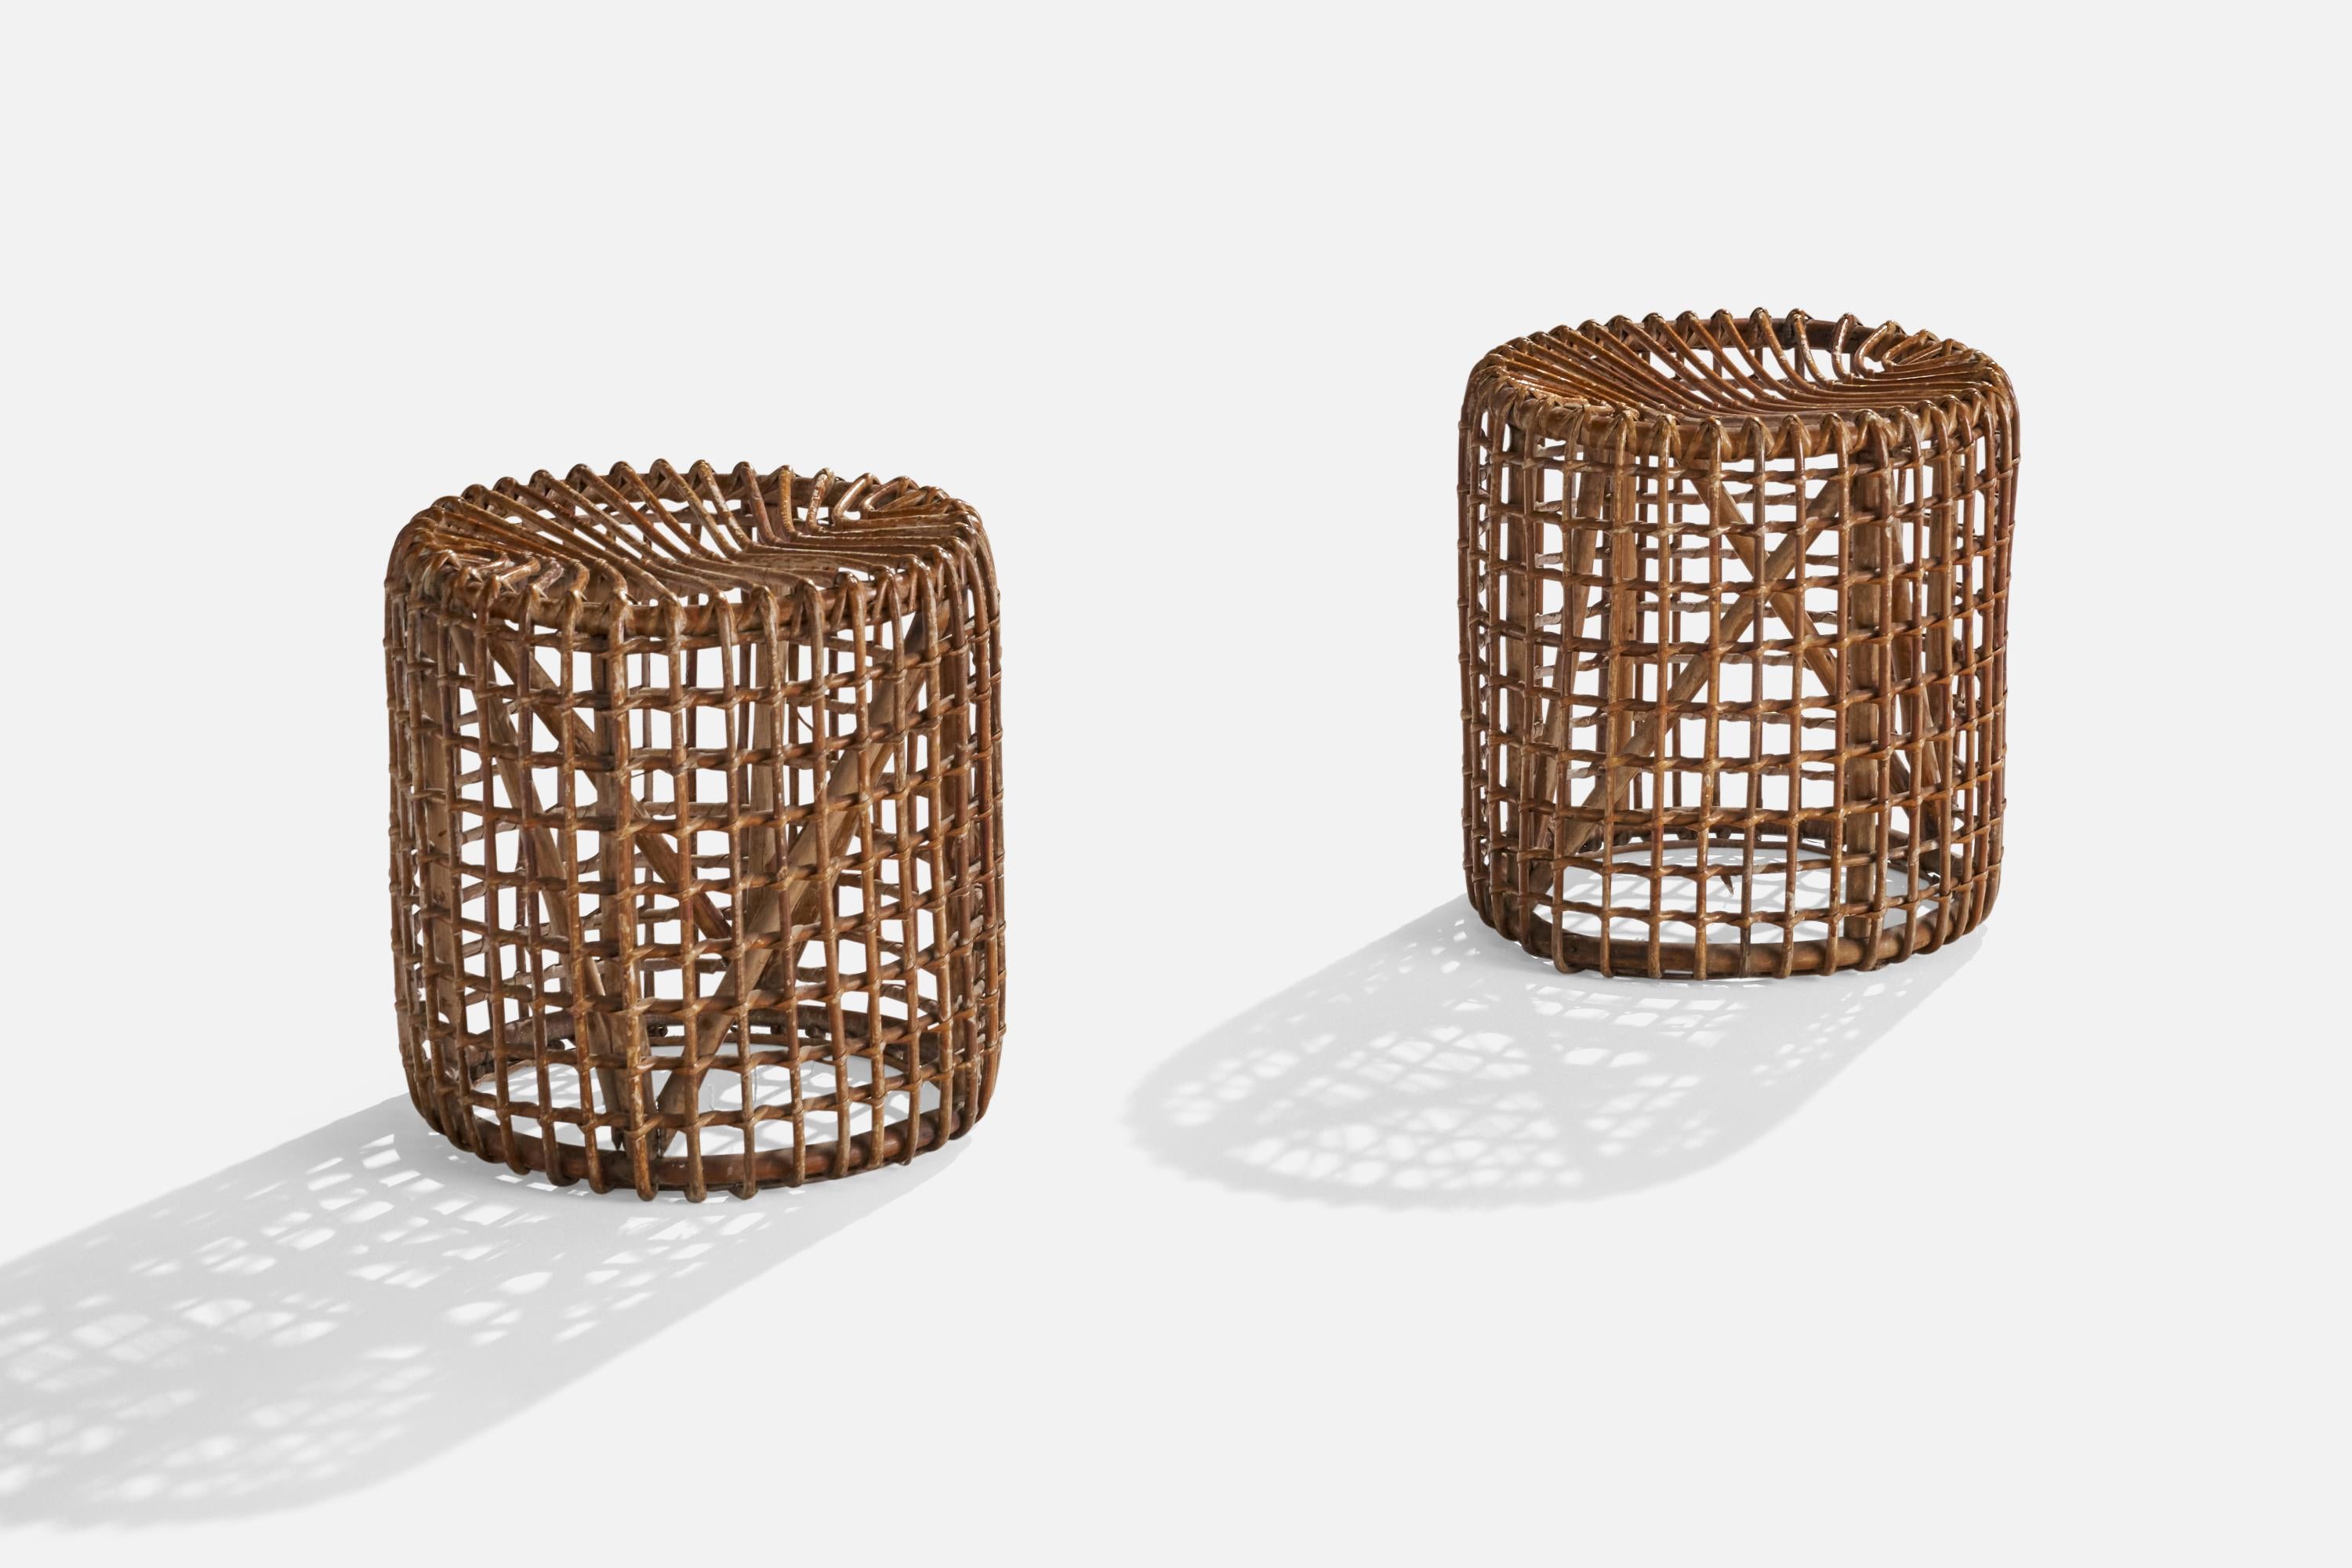 A pair of rattan and bamboo stools designed and produced in Italy, 1960s.

Seat height: 14.5”